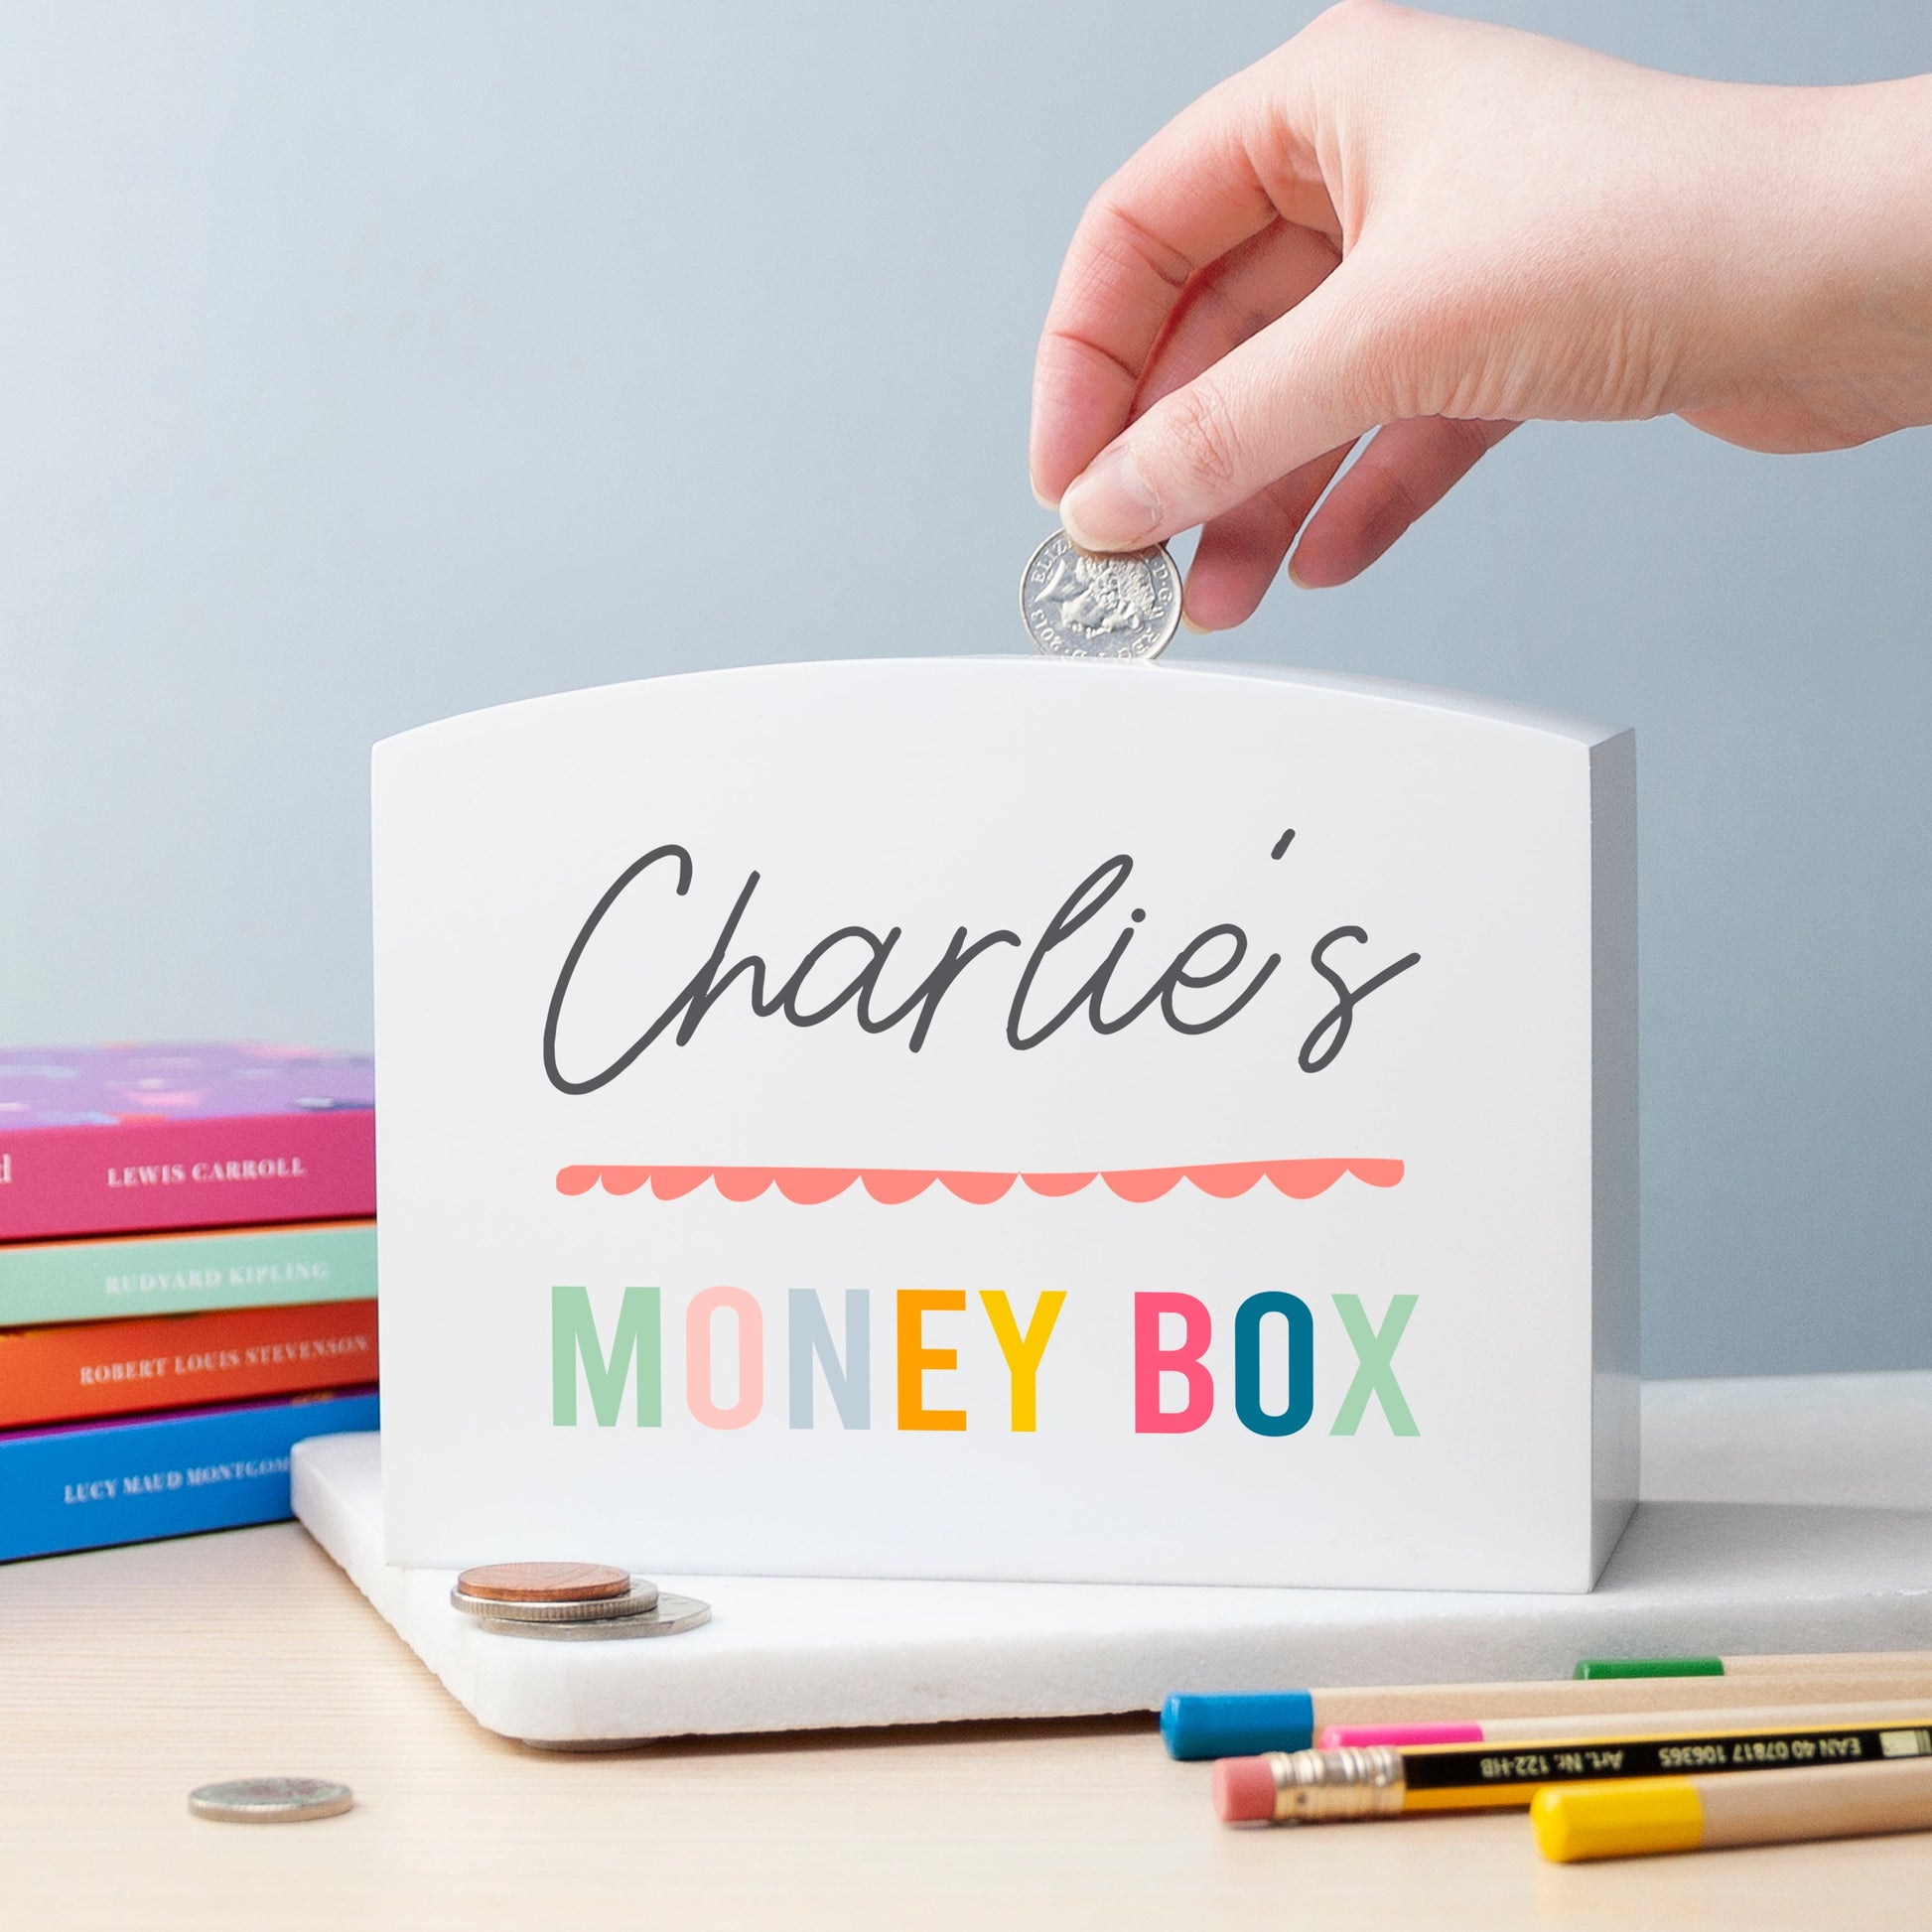 Personalized Money Boxes - Personalized Colourful Money Box 